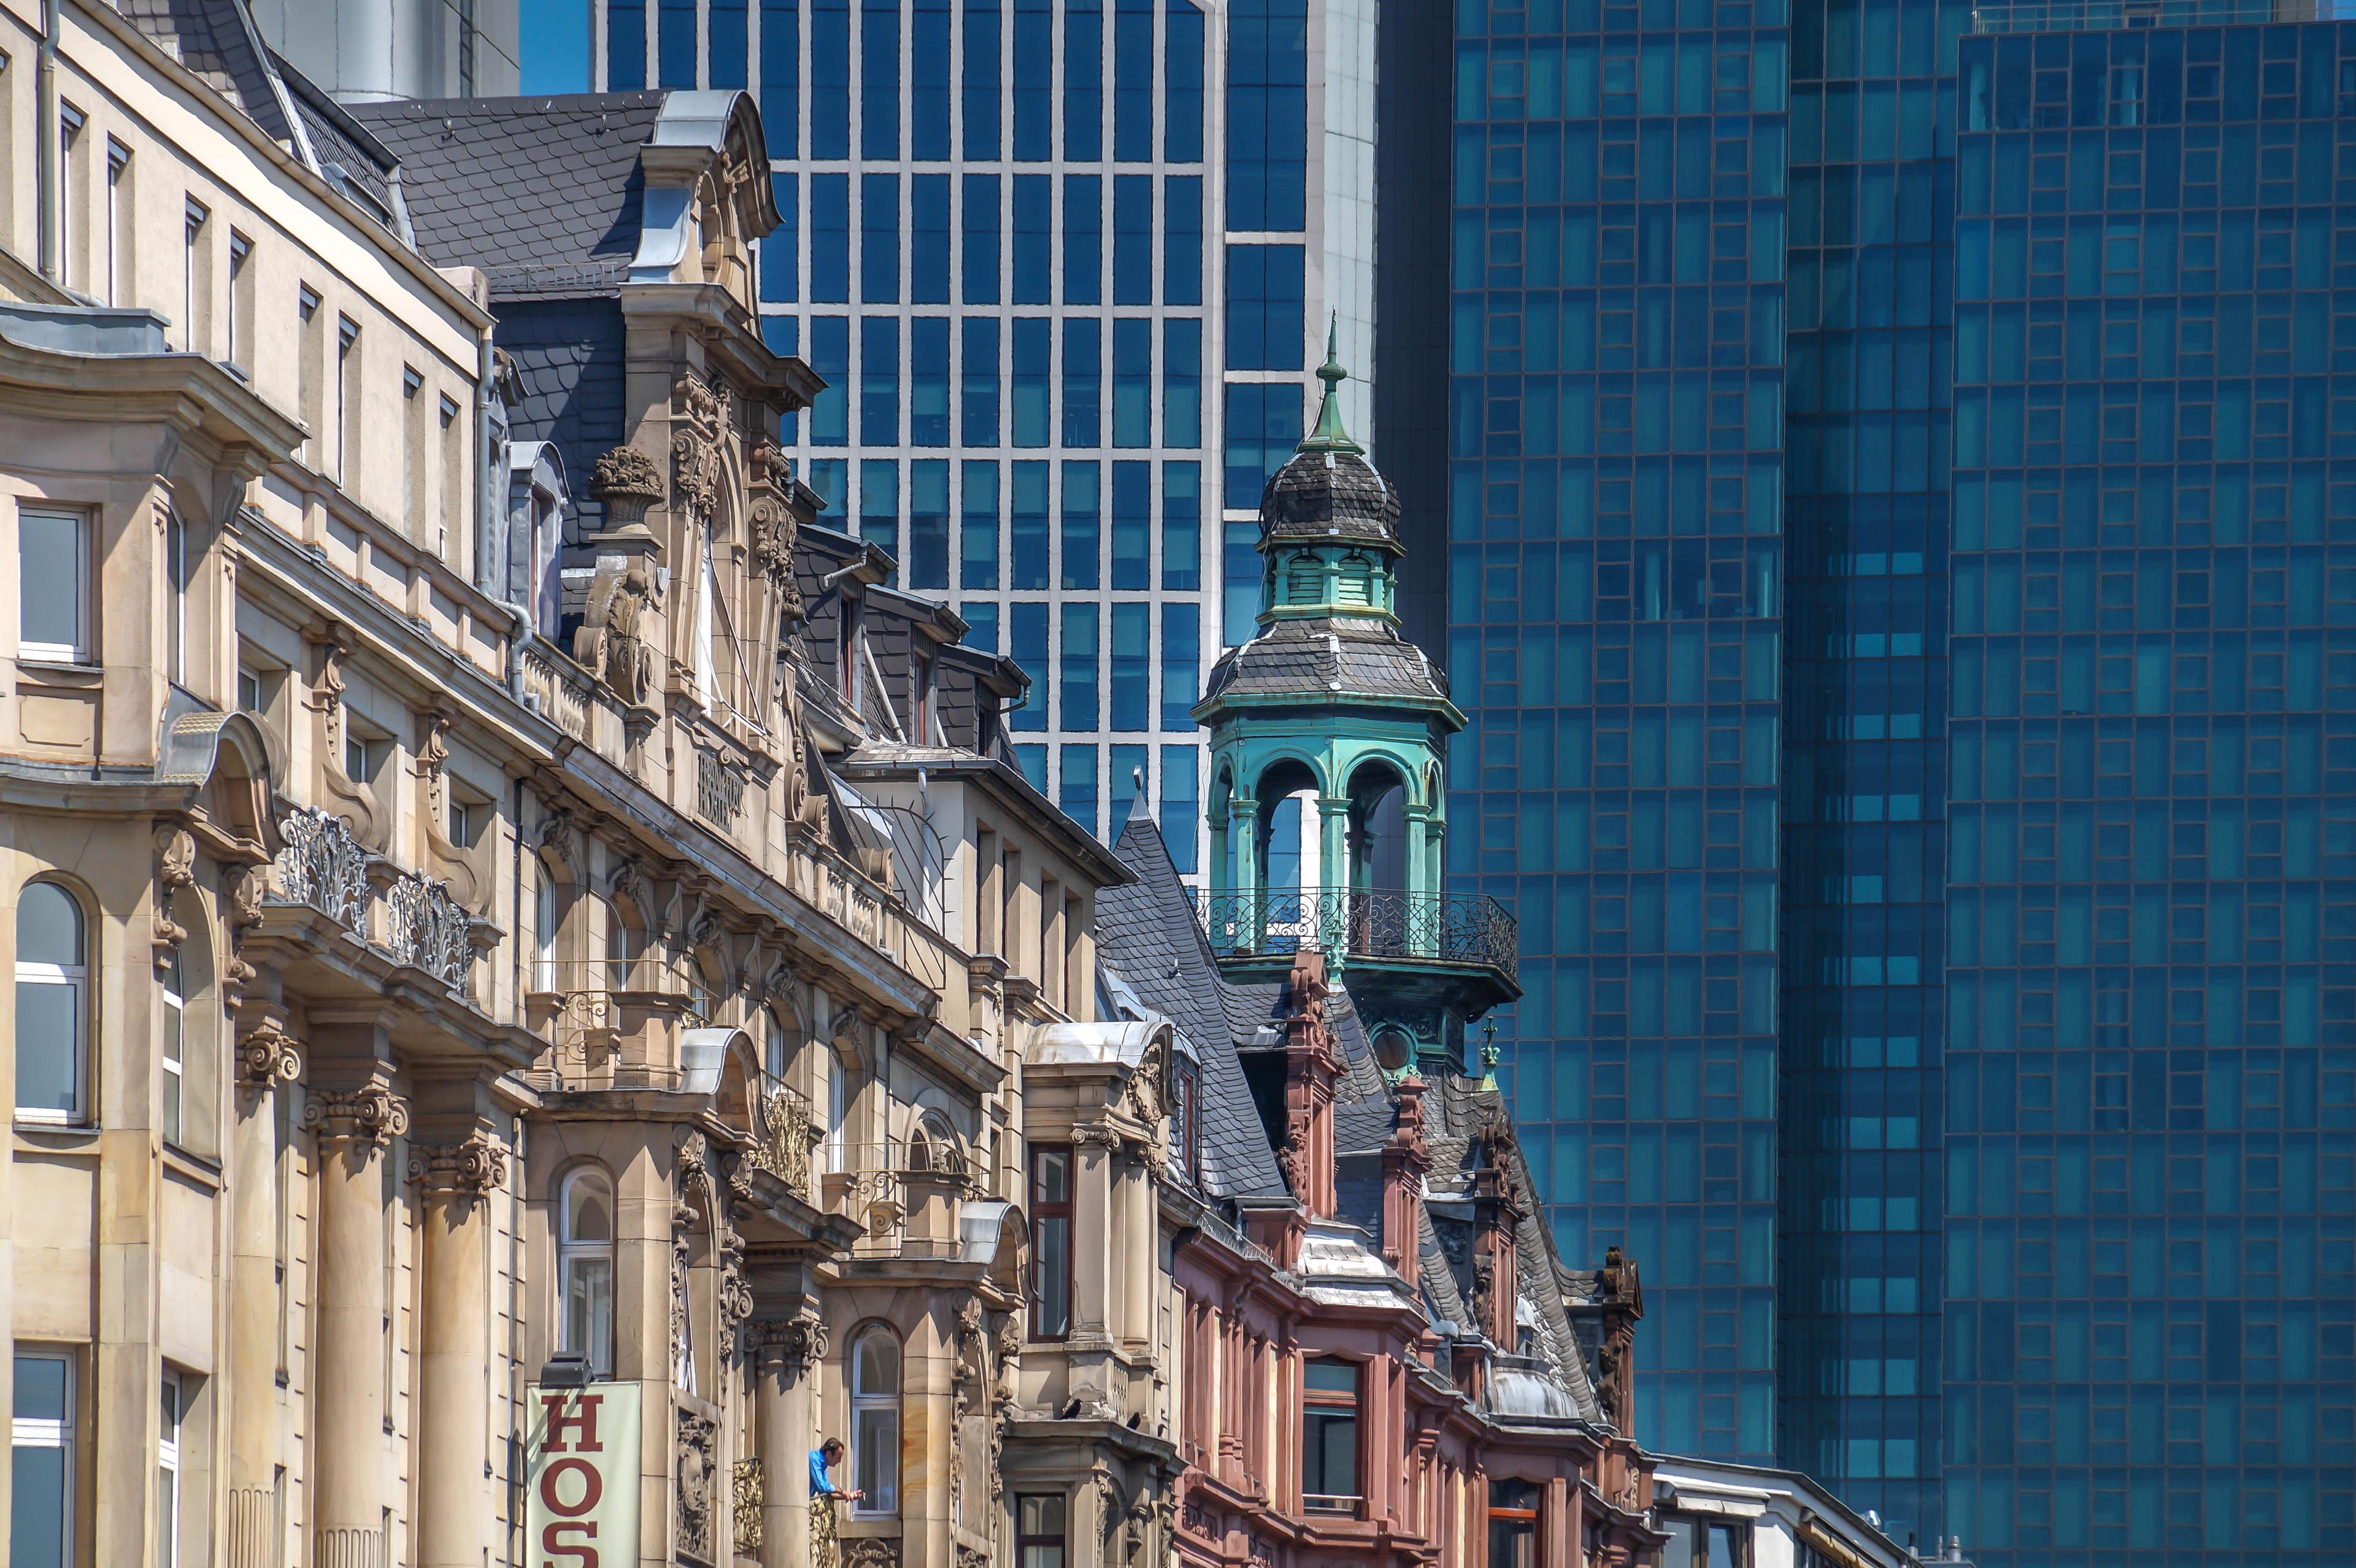 The contrast between old buildings and modern tower blocks in Frankfurt am Main.